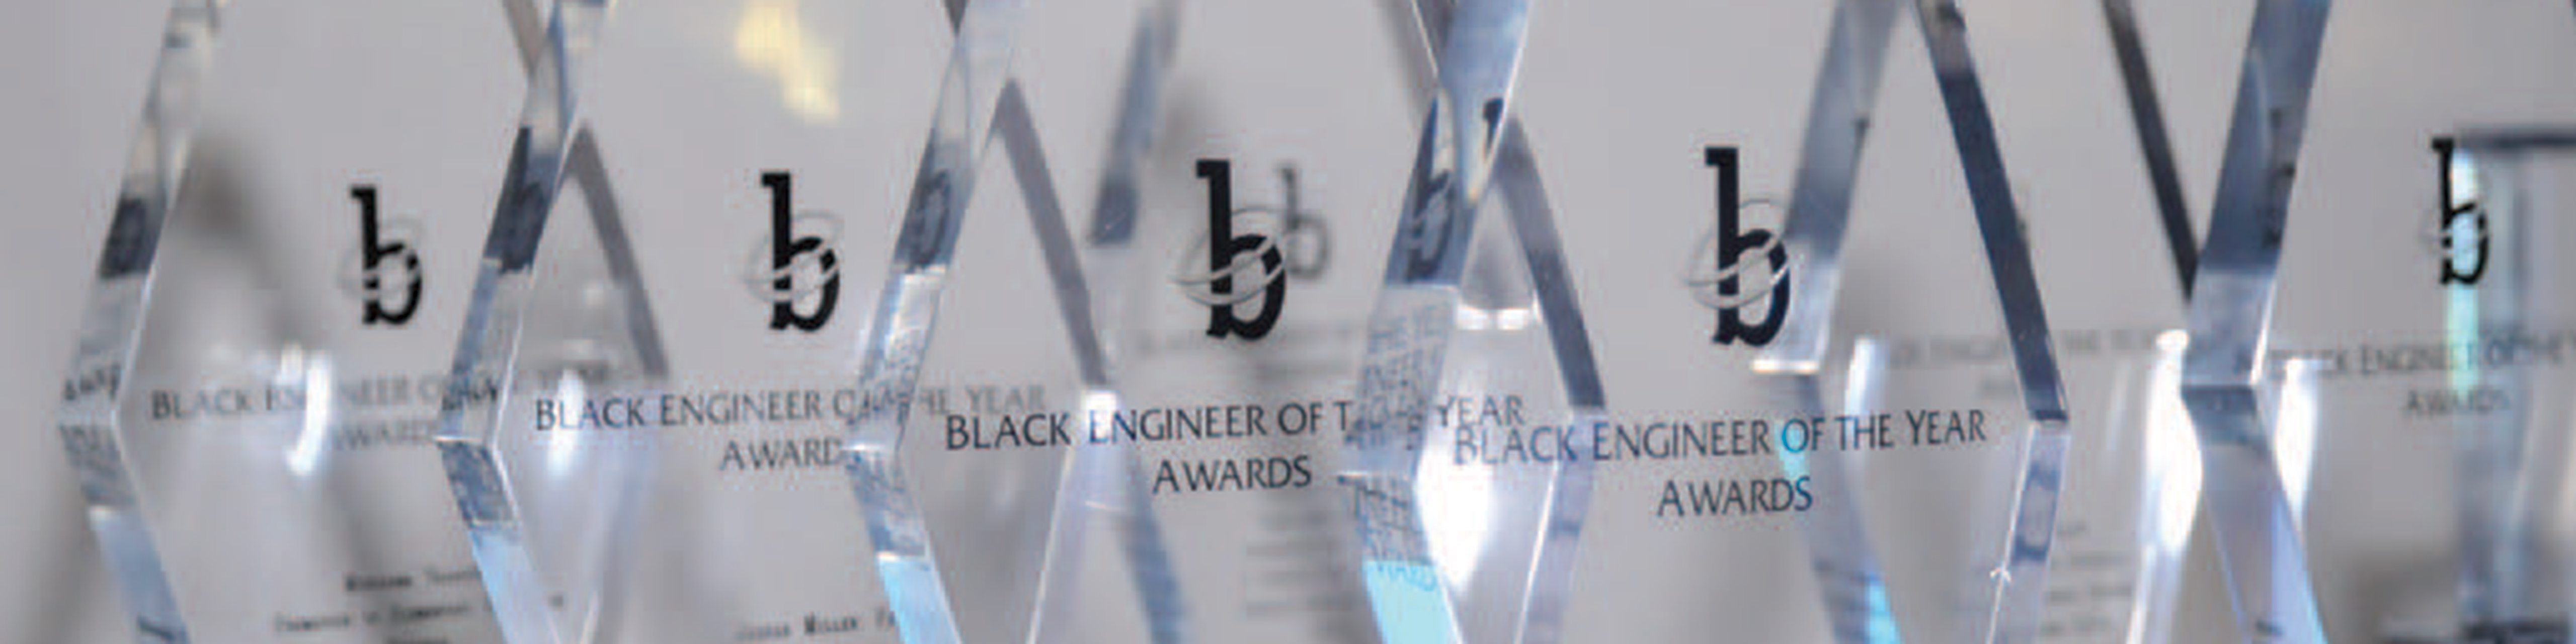 Row of Black Engineer of the Year Awards crystal trophies 